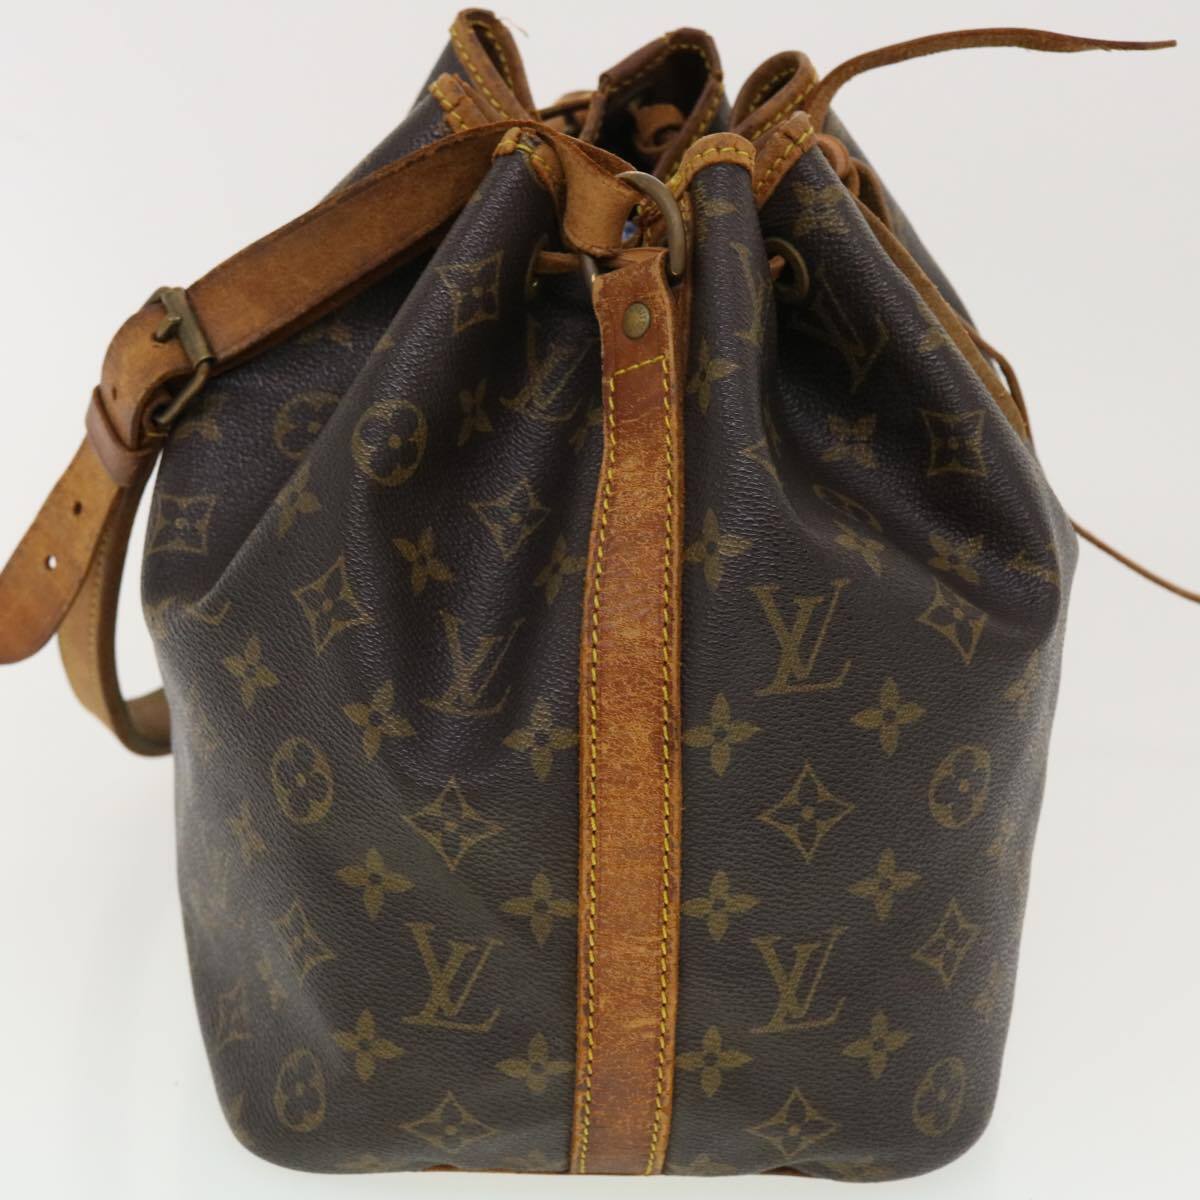 Cleaning a Vintage Louis Vuitton Petite Noe bag - Before and after 